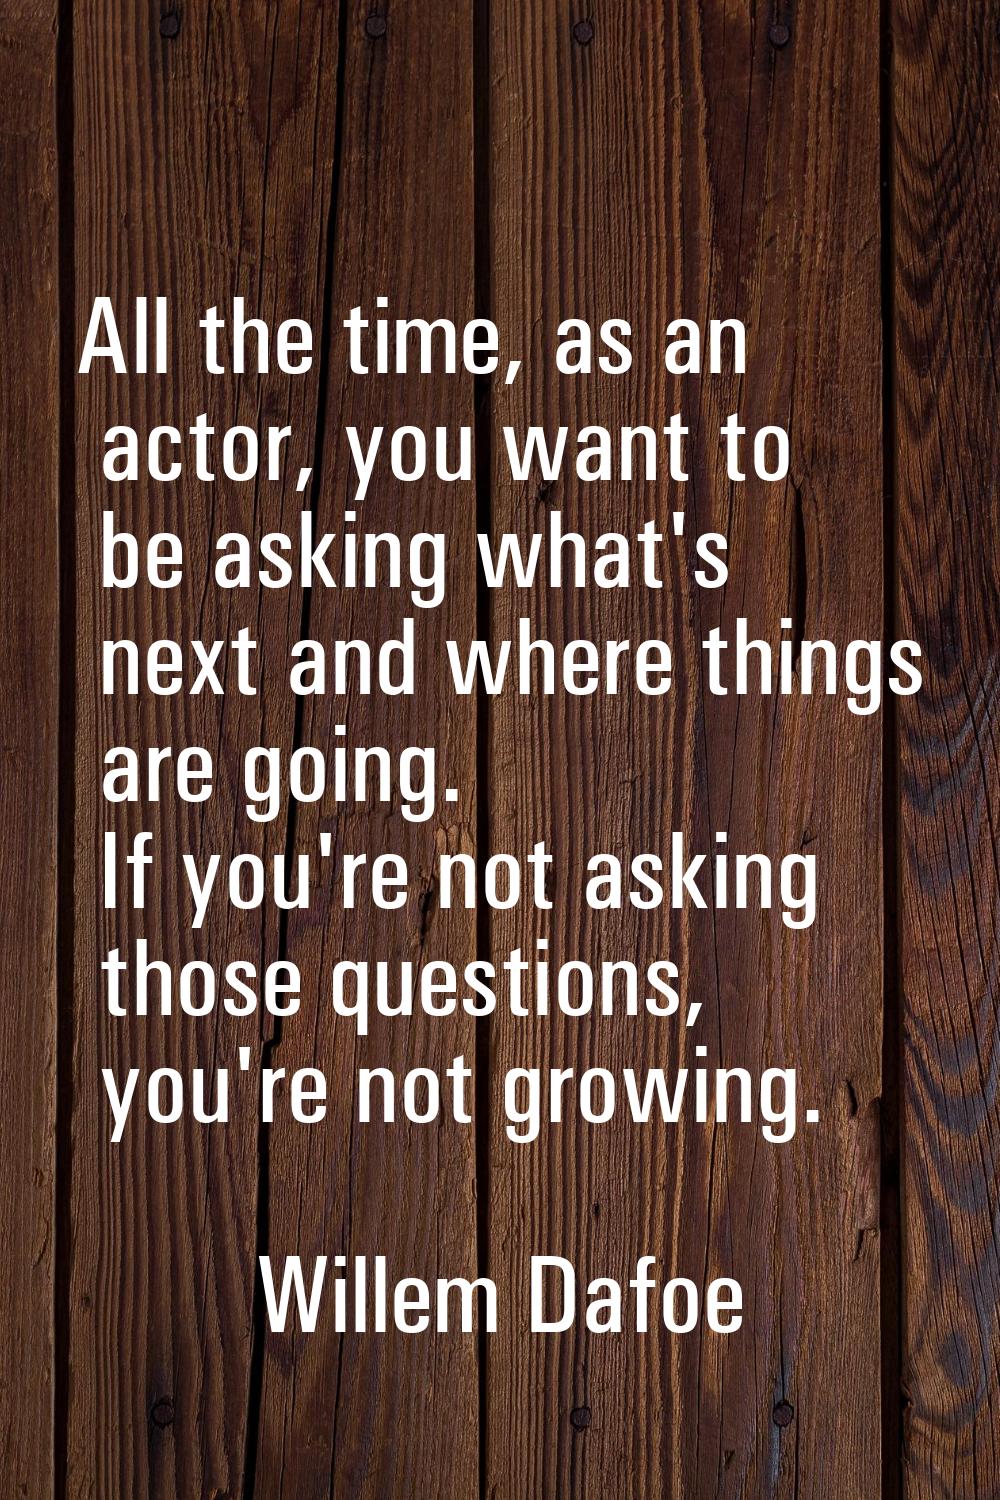 All the time, as an actor, you want to be asking what's next and where things are going. If you're 